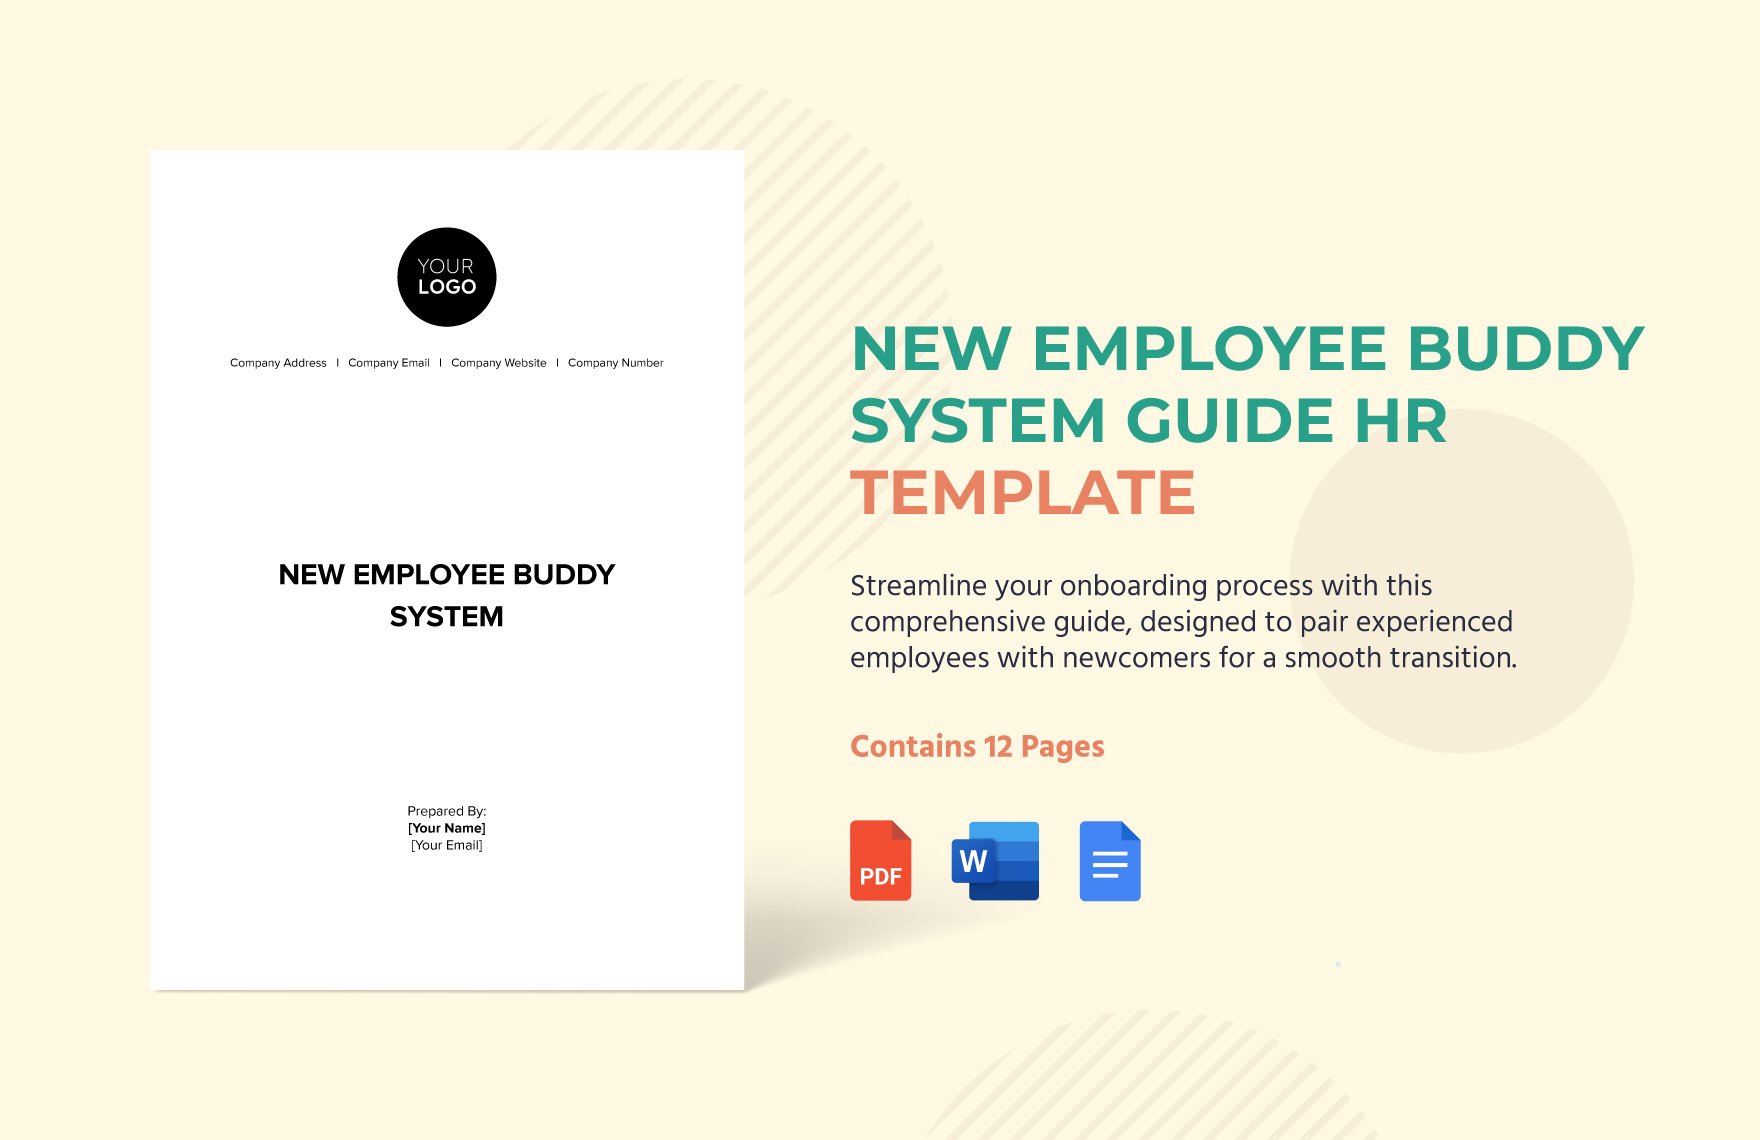 New Employee Buddy System Guide HR Template in Word, Google Docs, PDF